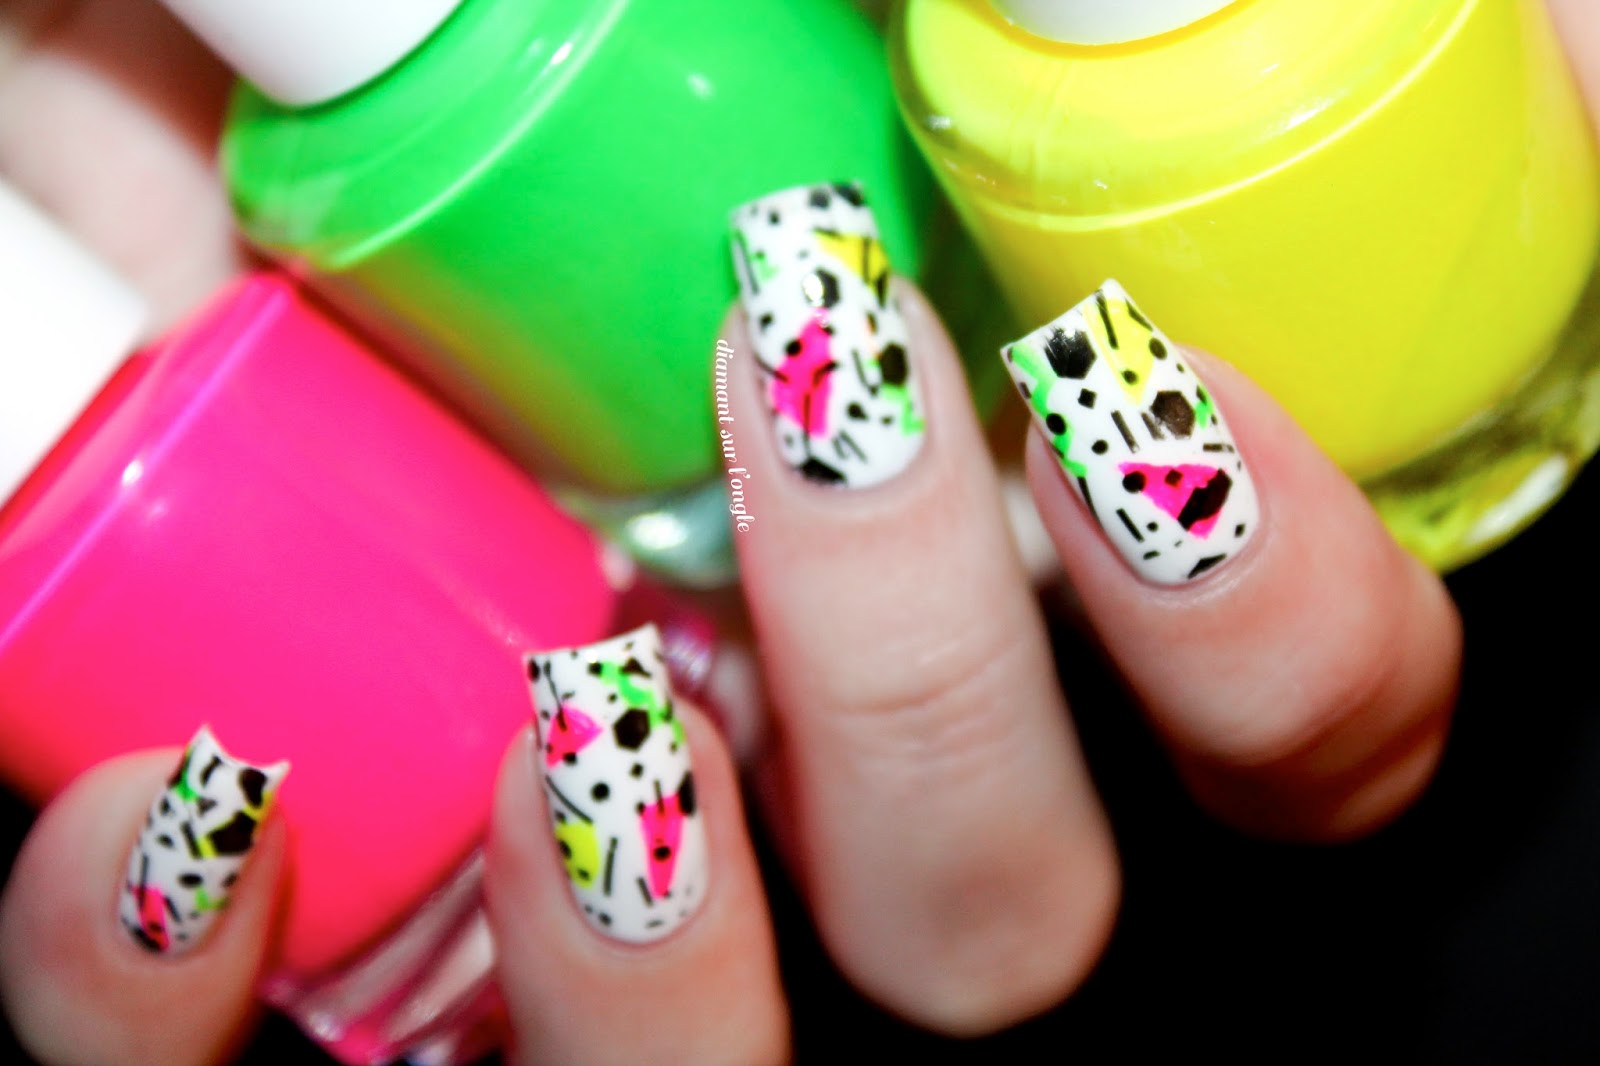 neon bright nail art inspired by the eighties